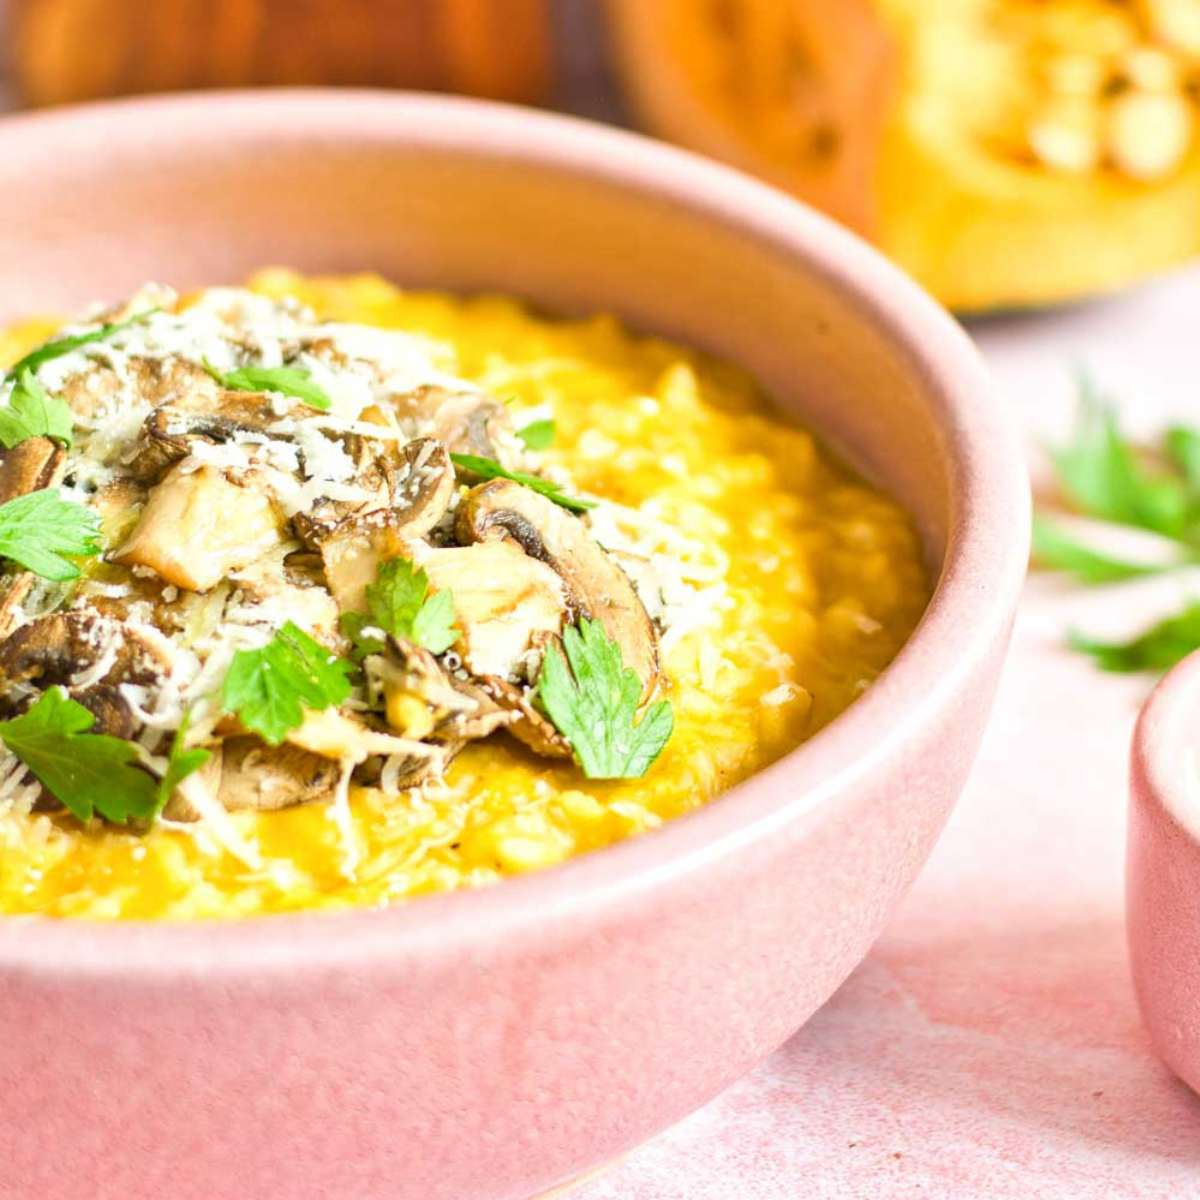 Creamy pumpkin risotto cooked in chicken bone broth. It's topped with mushrooms and extra Parmigiano Reggiano cheese.